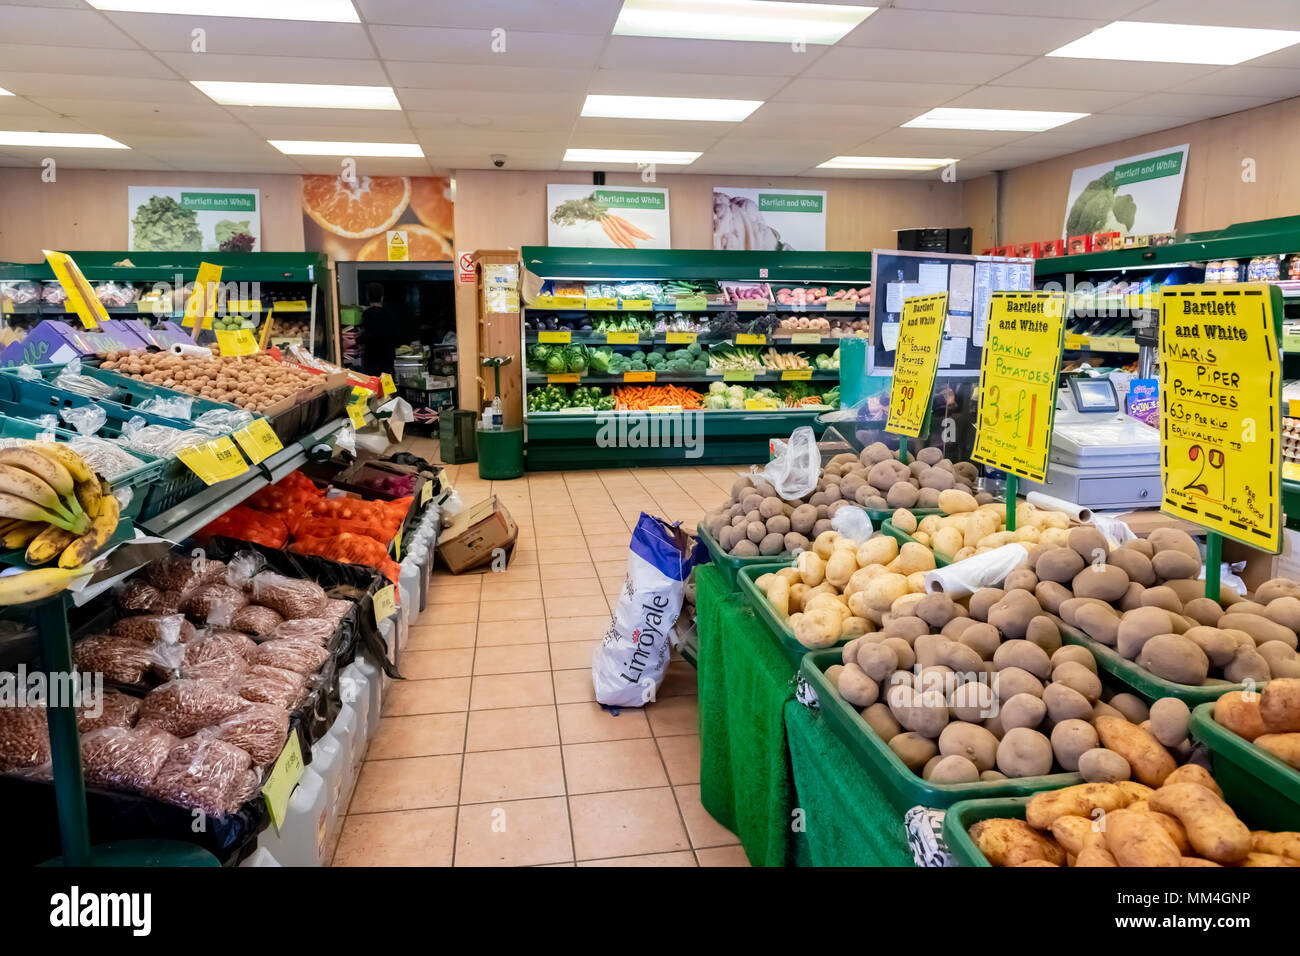 Grand display of fruit and vegetables, Bartlett and white greengrocers Ramsgate Stock Photo